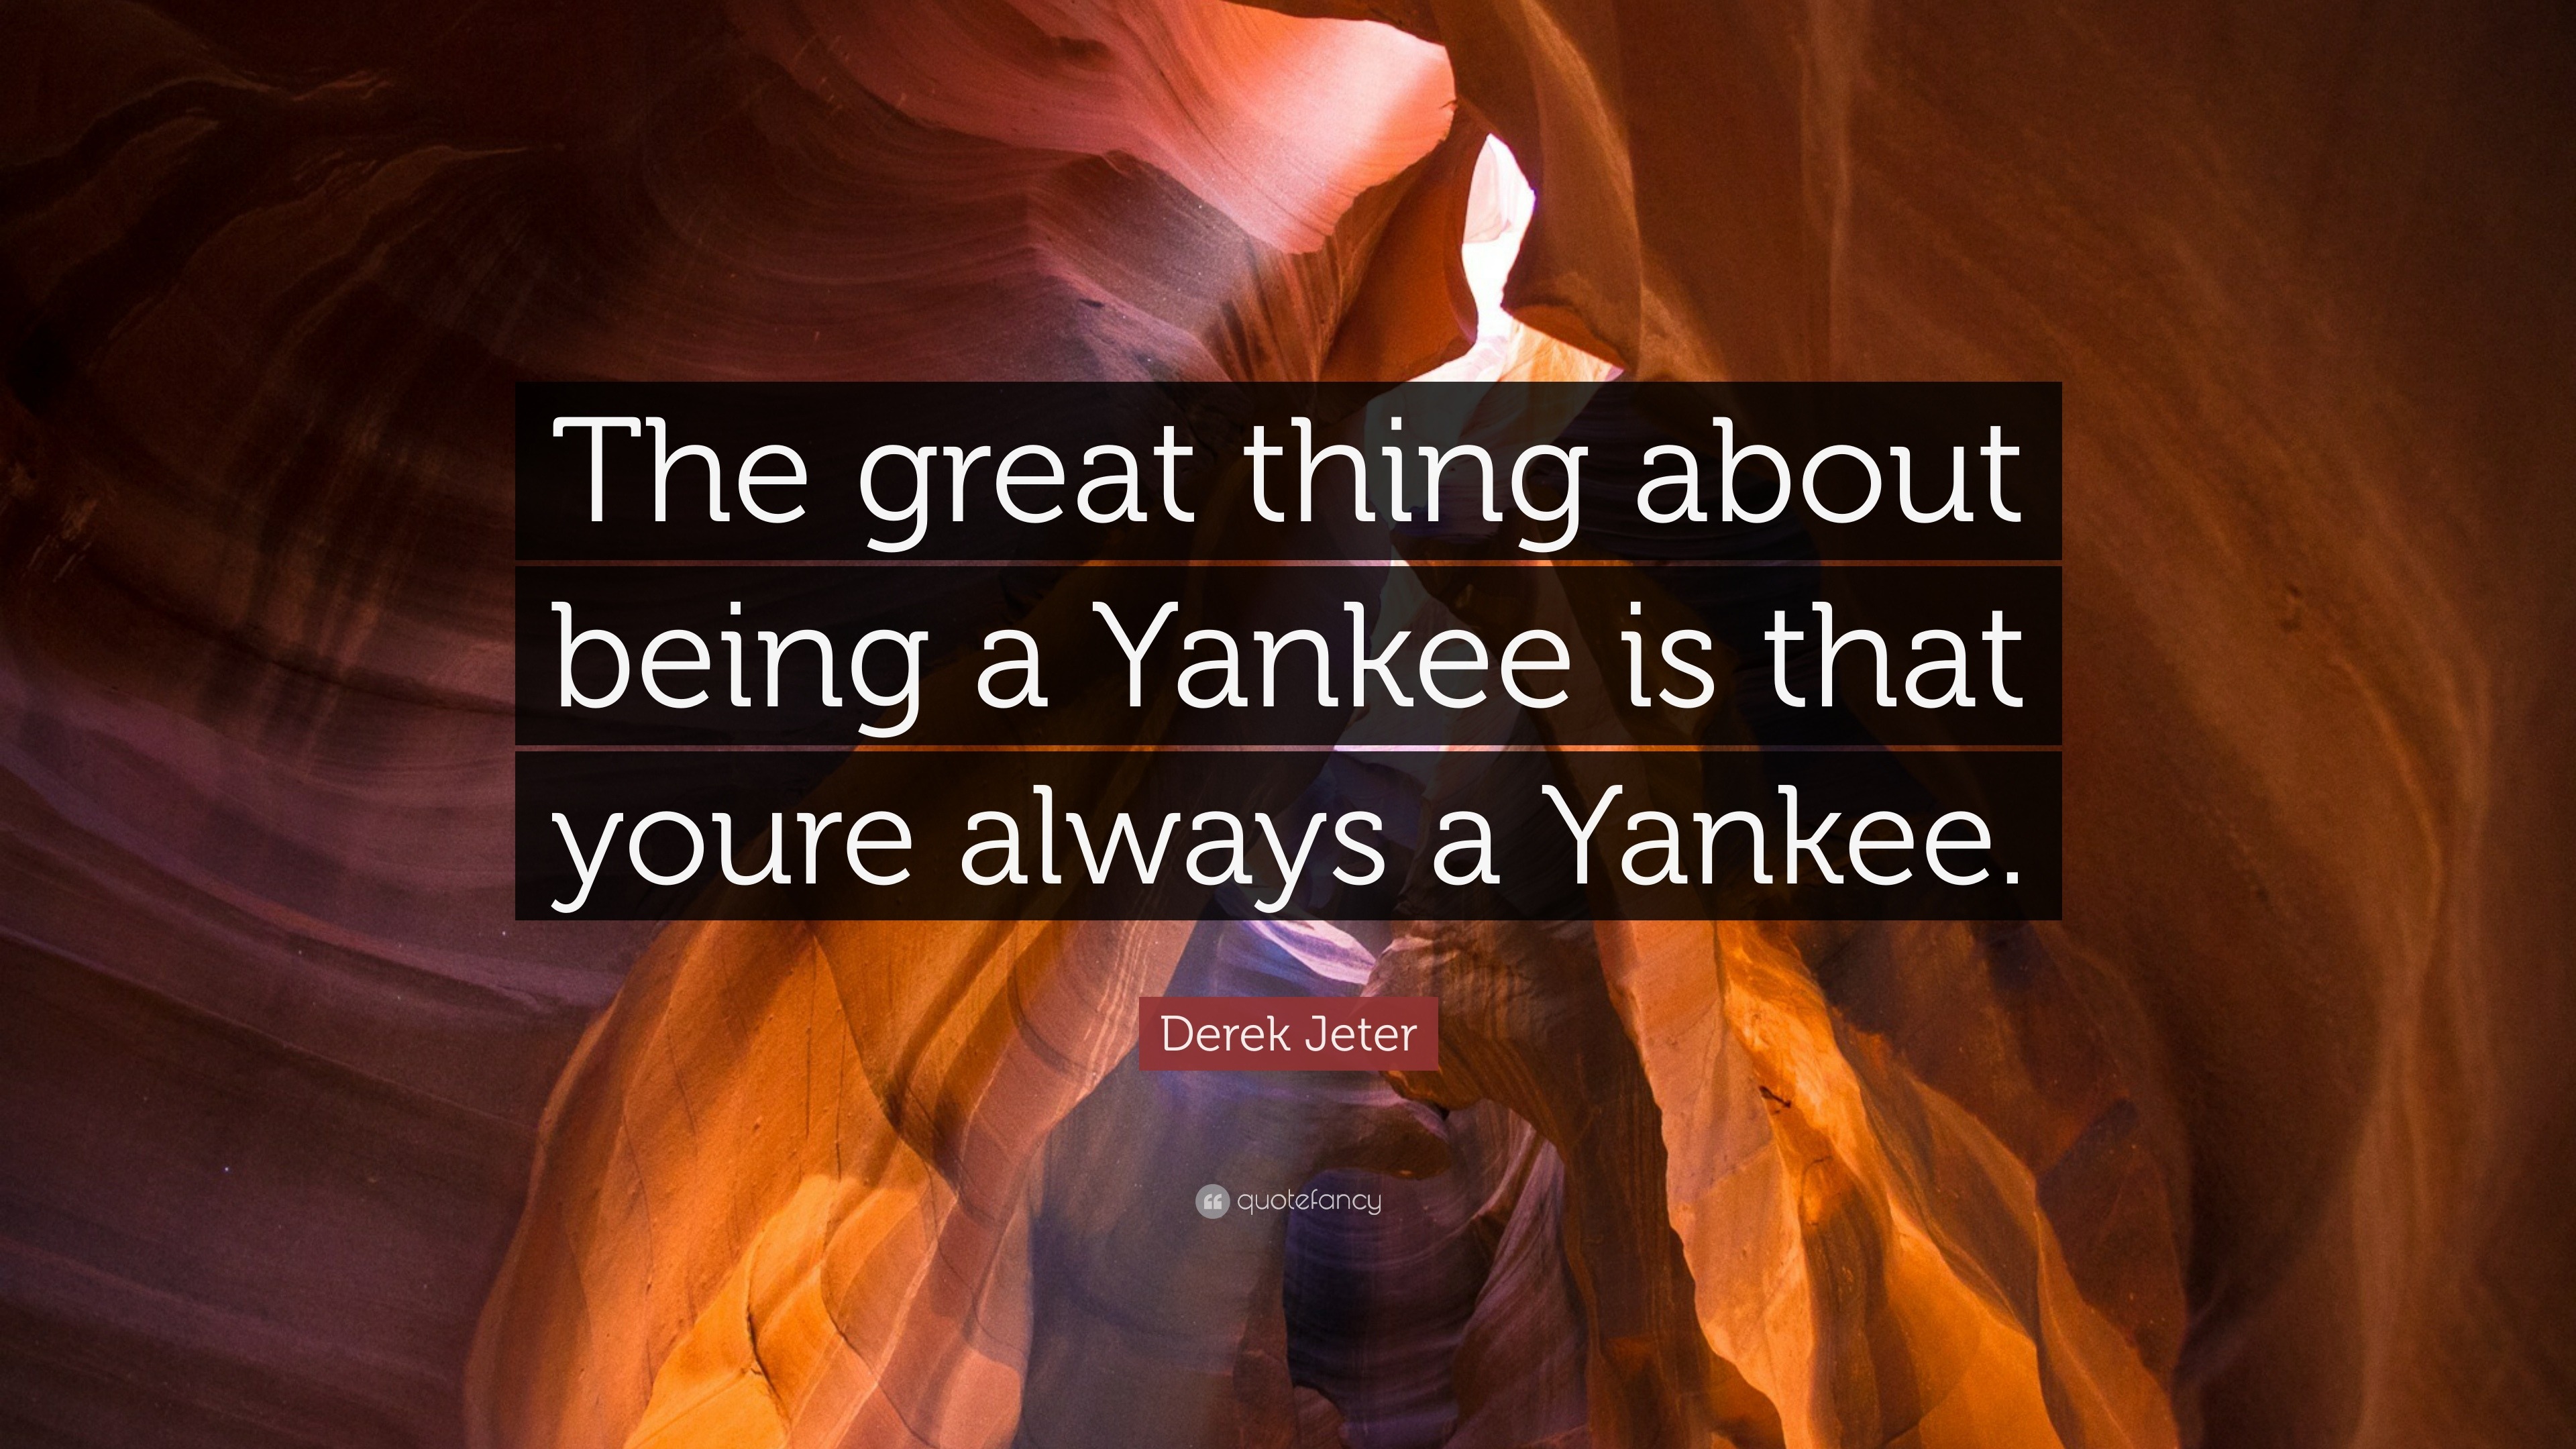 Derek Jeter Quote: “The great thing about being a Yankee is that